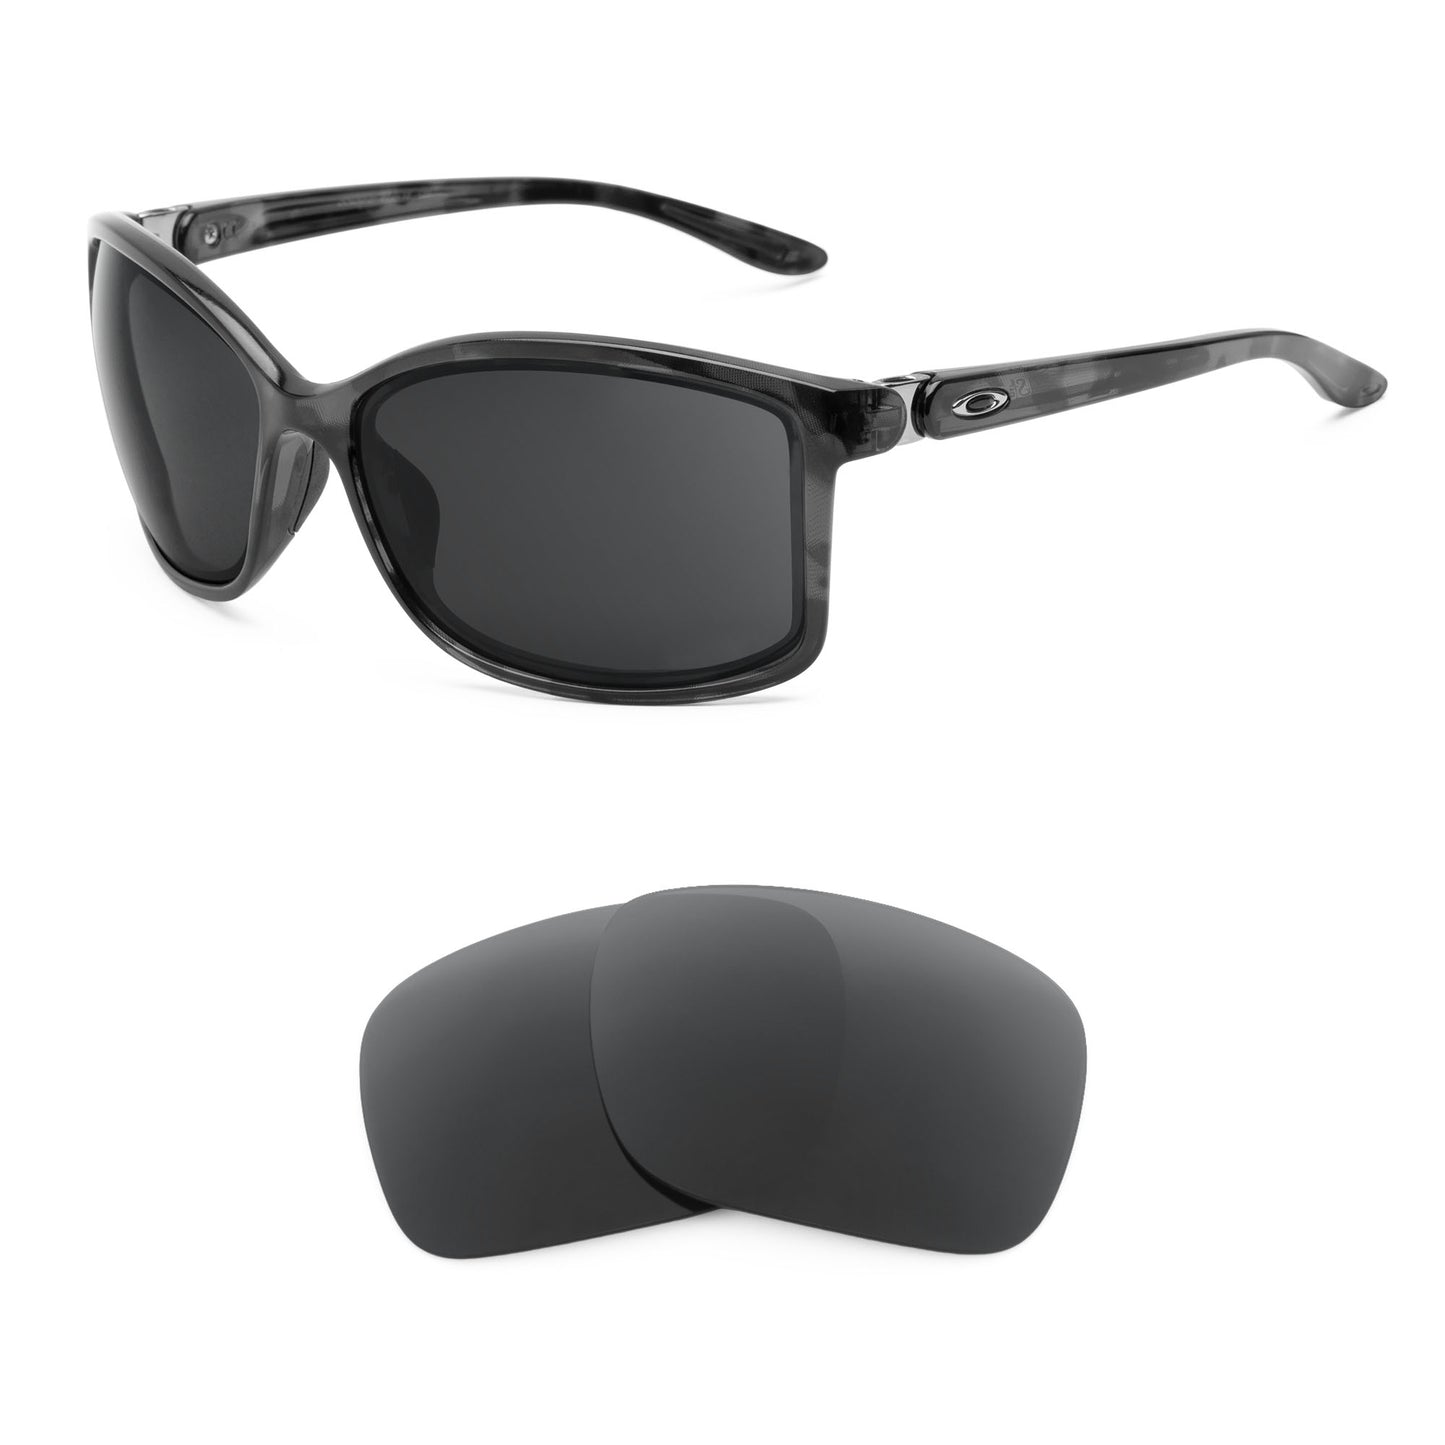 Oakley Step Up sunglasses with replacement lenses